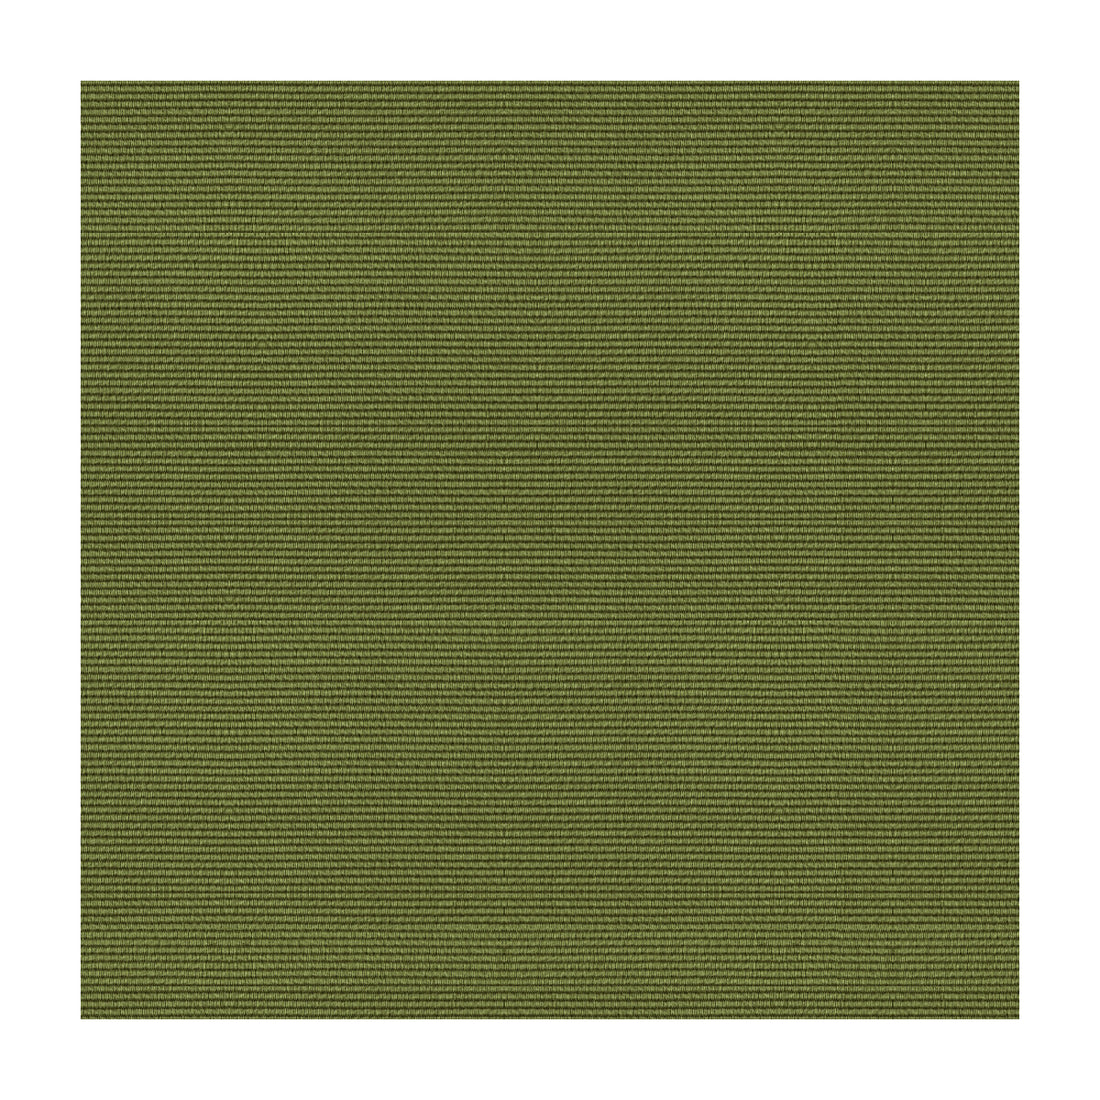 Bosporus Ottoman Texture fabric in moss color - pattern BR-83806.406.0 - by Brunschwig &amp; Fils